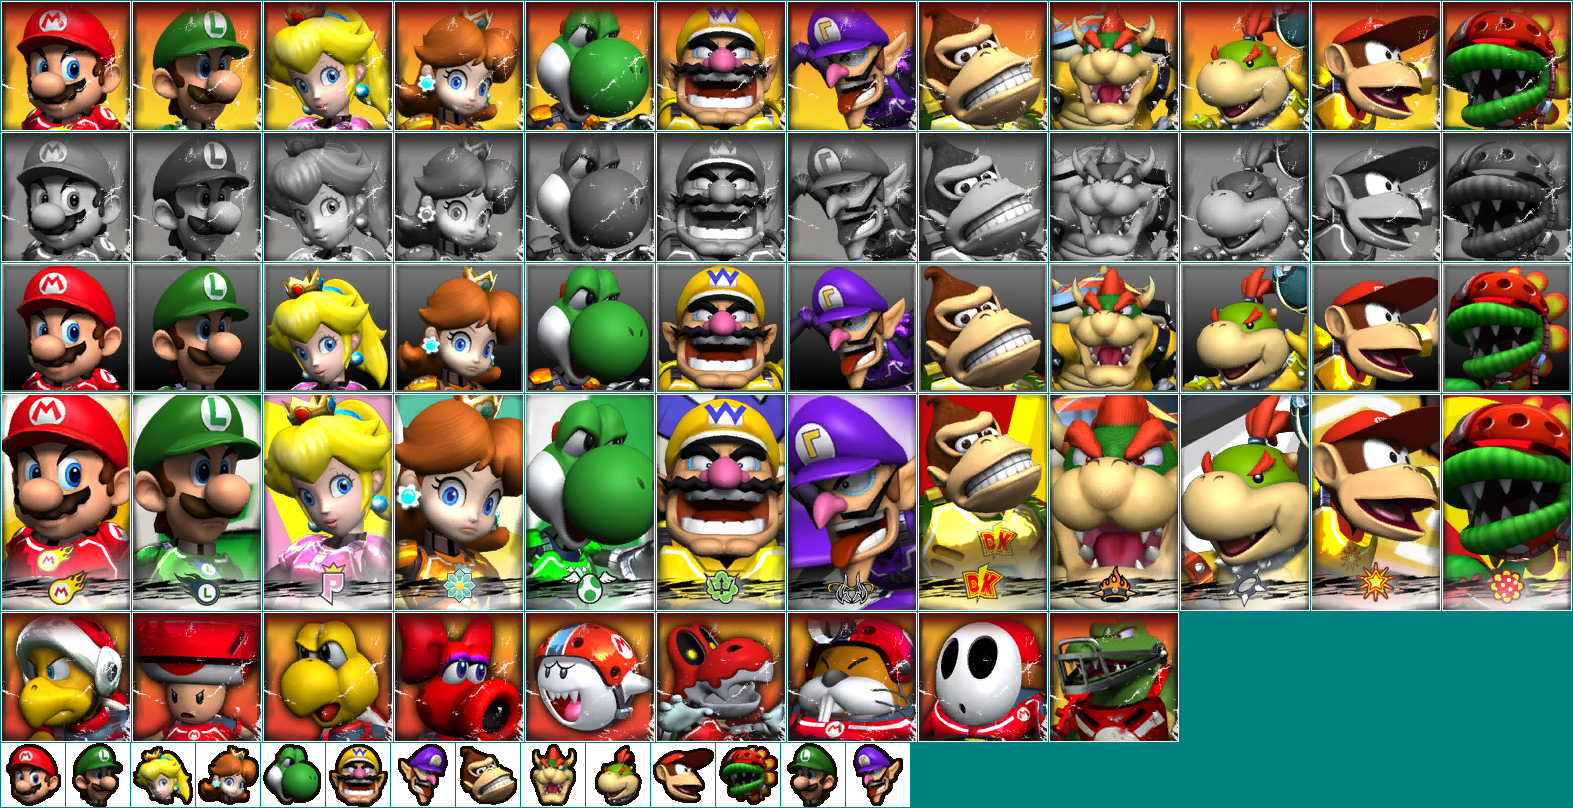 Mario Strikers Charged - Character Selection